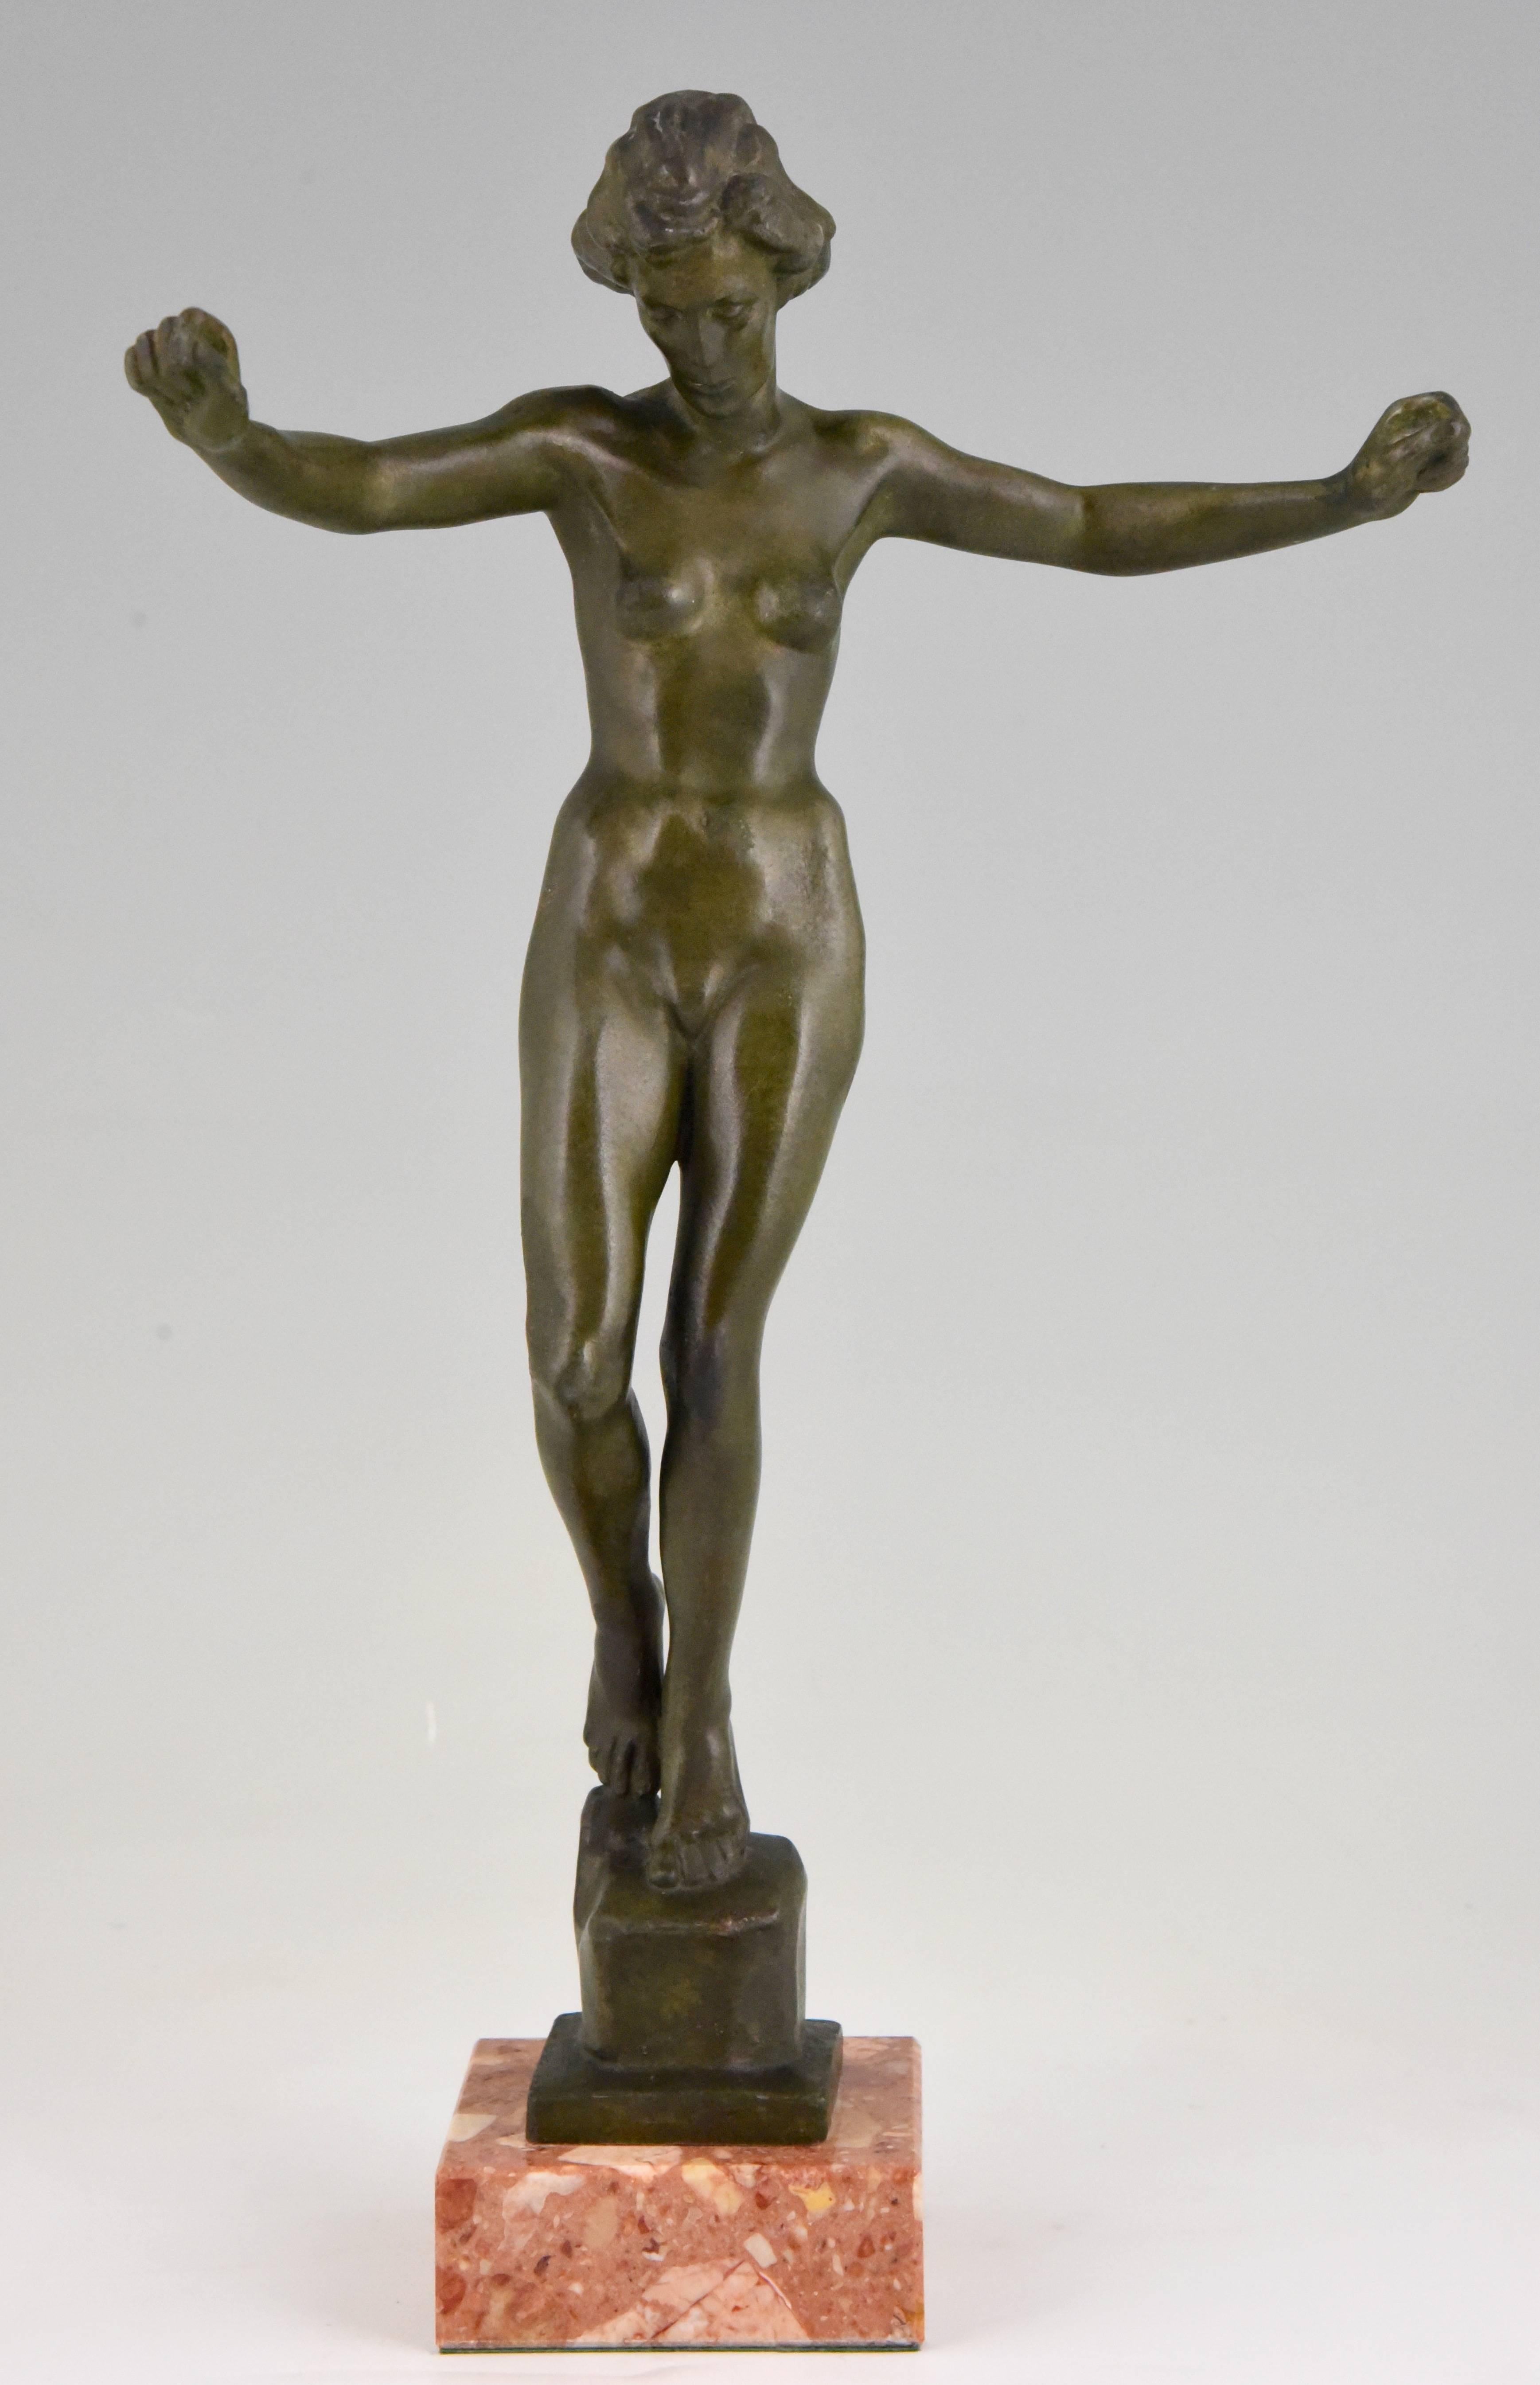 Lovely Art Deco bronze sculpture of a balancing nude on a marble base. 

Artist/ Maker: David Fahrner.
Signature/ Marks: Fahrner 1941.
Style: Art Deco
Date: 1941
Material: Patinated bronze. Marble base.
Origin: Germany
Size: H. 37 cm x L. 21